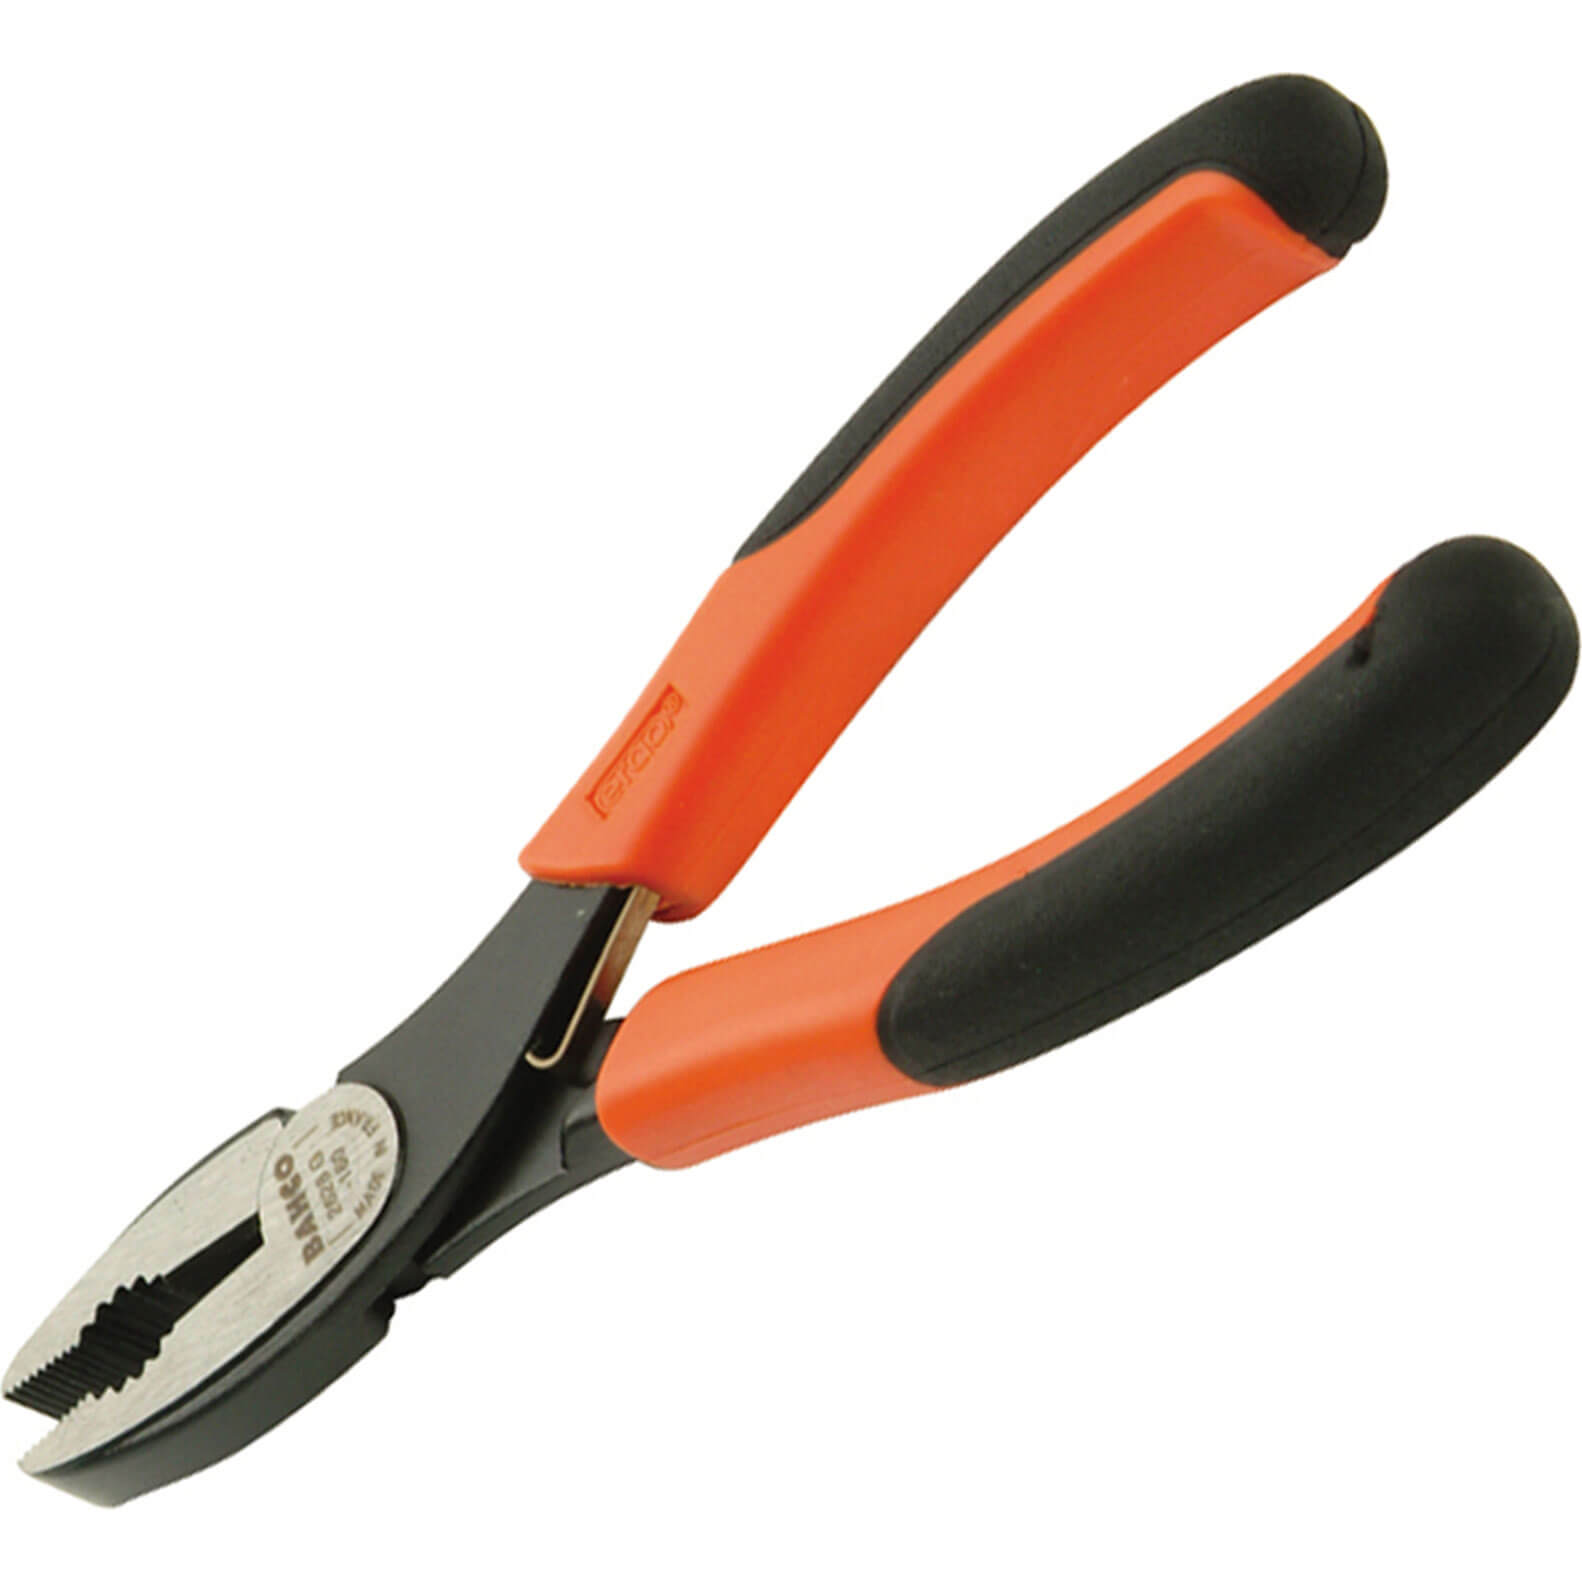 Photo of Bahco 2628g Combination Pliers Ergo Handles 160mm